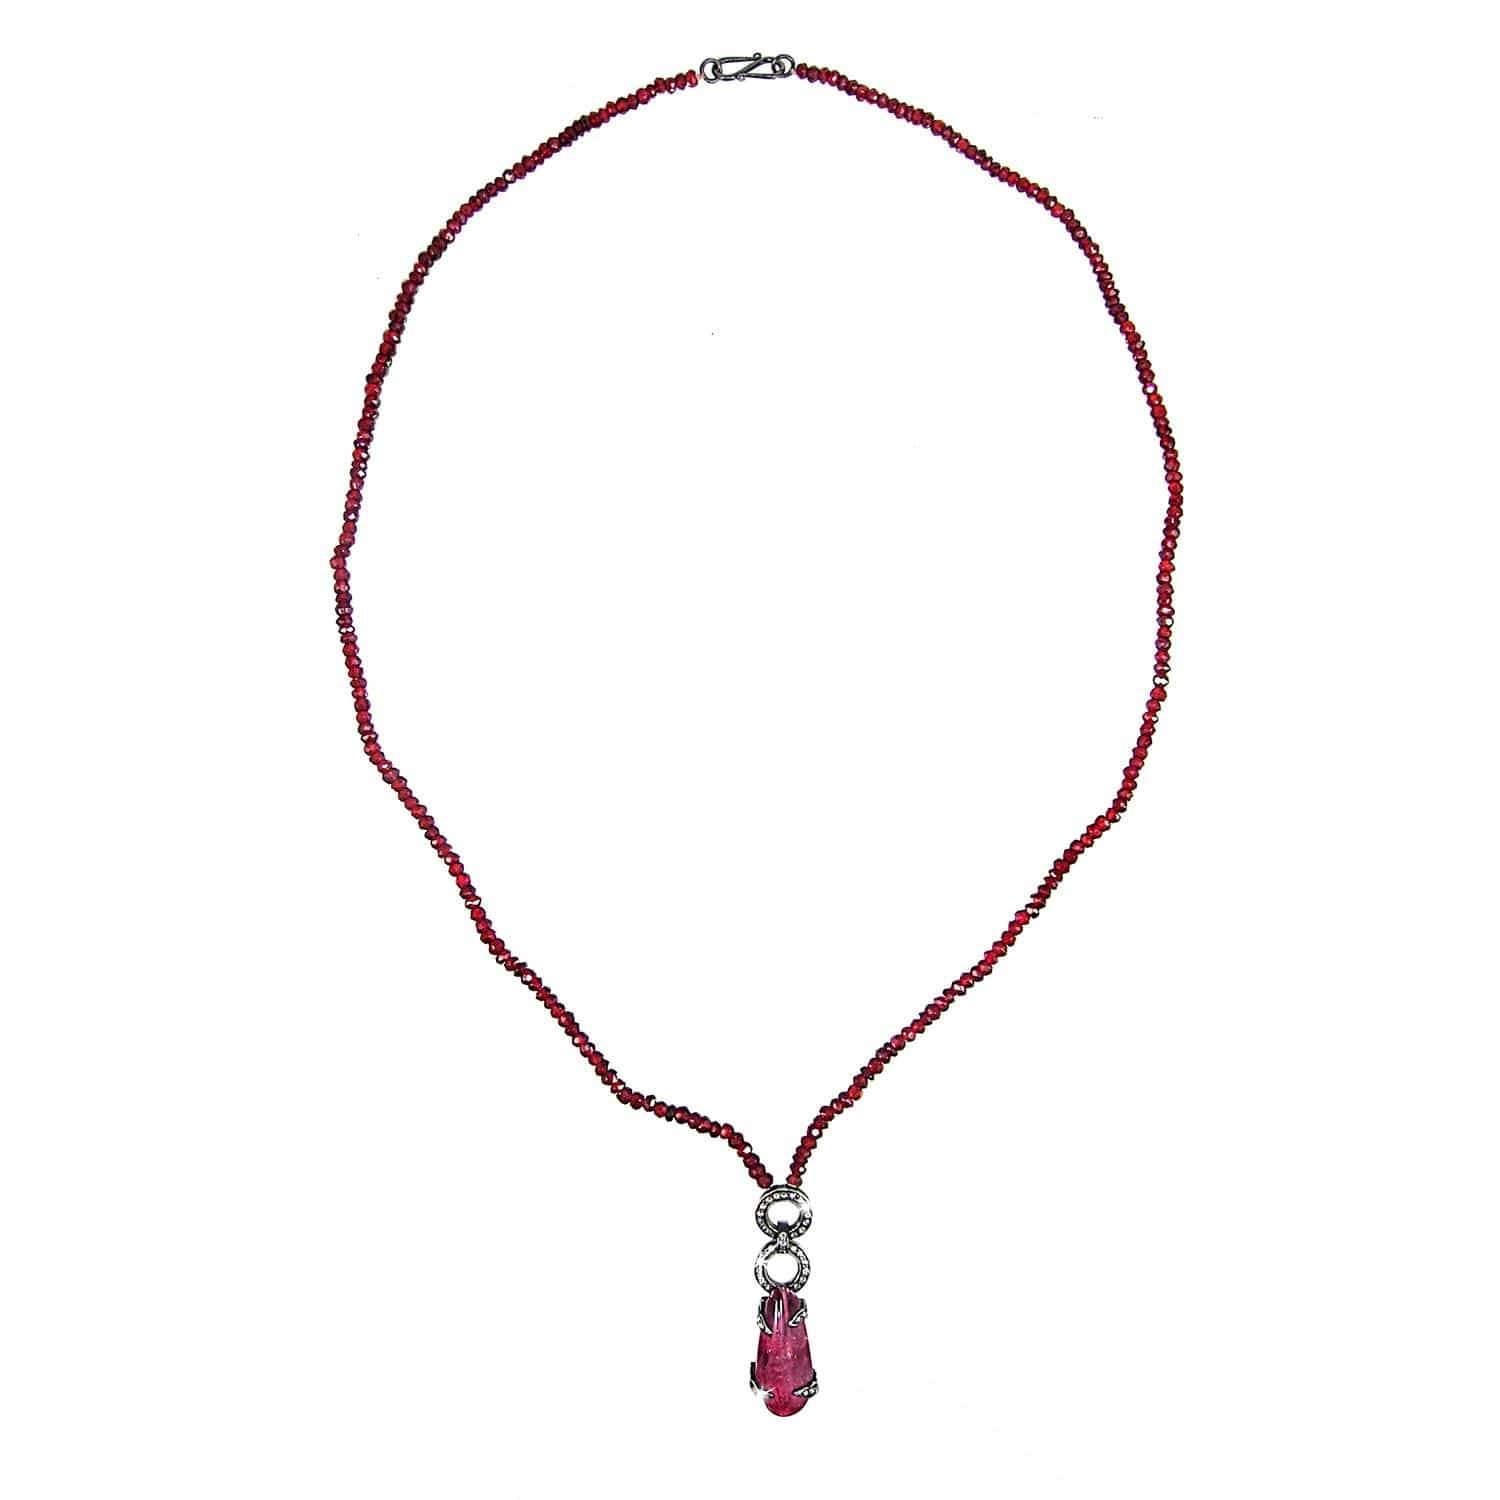 A beautiful natural pink tourmaline and diamond pendant suspended by two circular diamond links set in blackened oxidized silver on a chain of natural blood red garnets.
- Pendant is pink cabochon accented with single cut white diamonds 
- Suspended